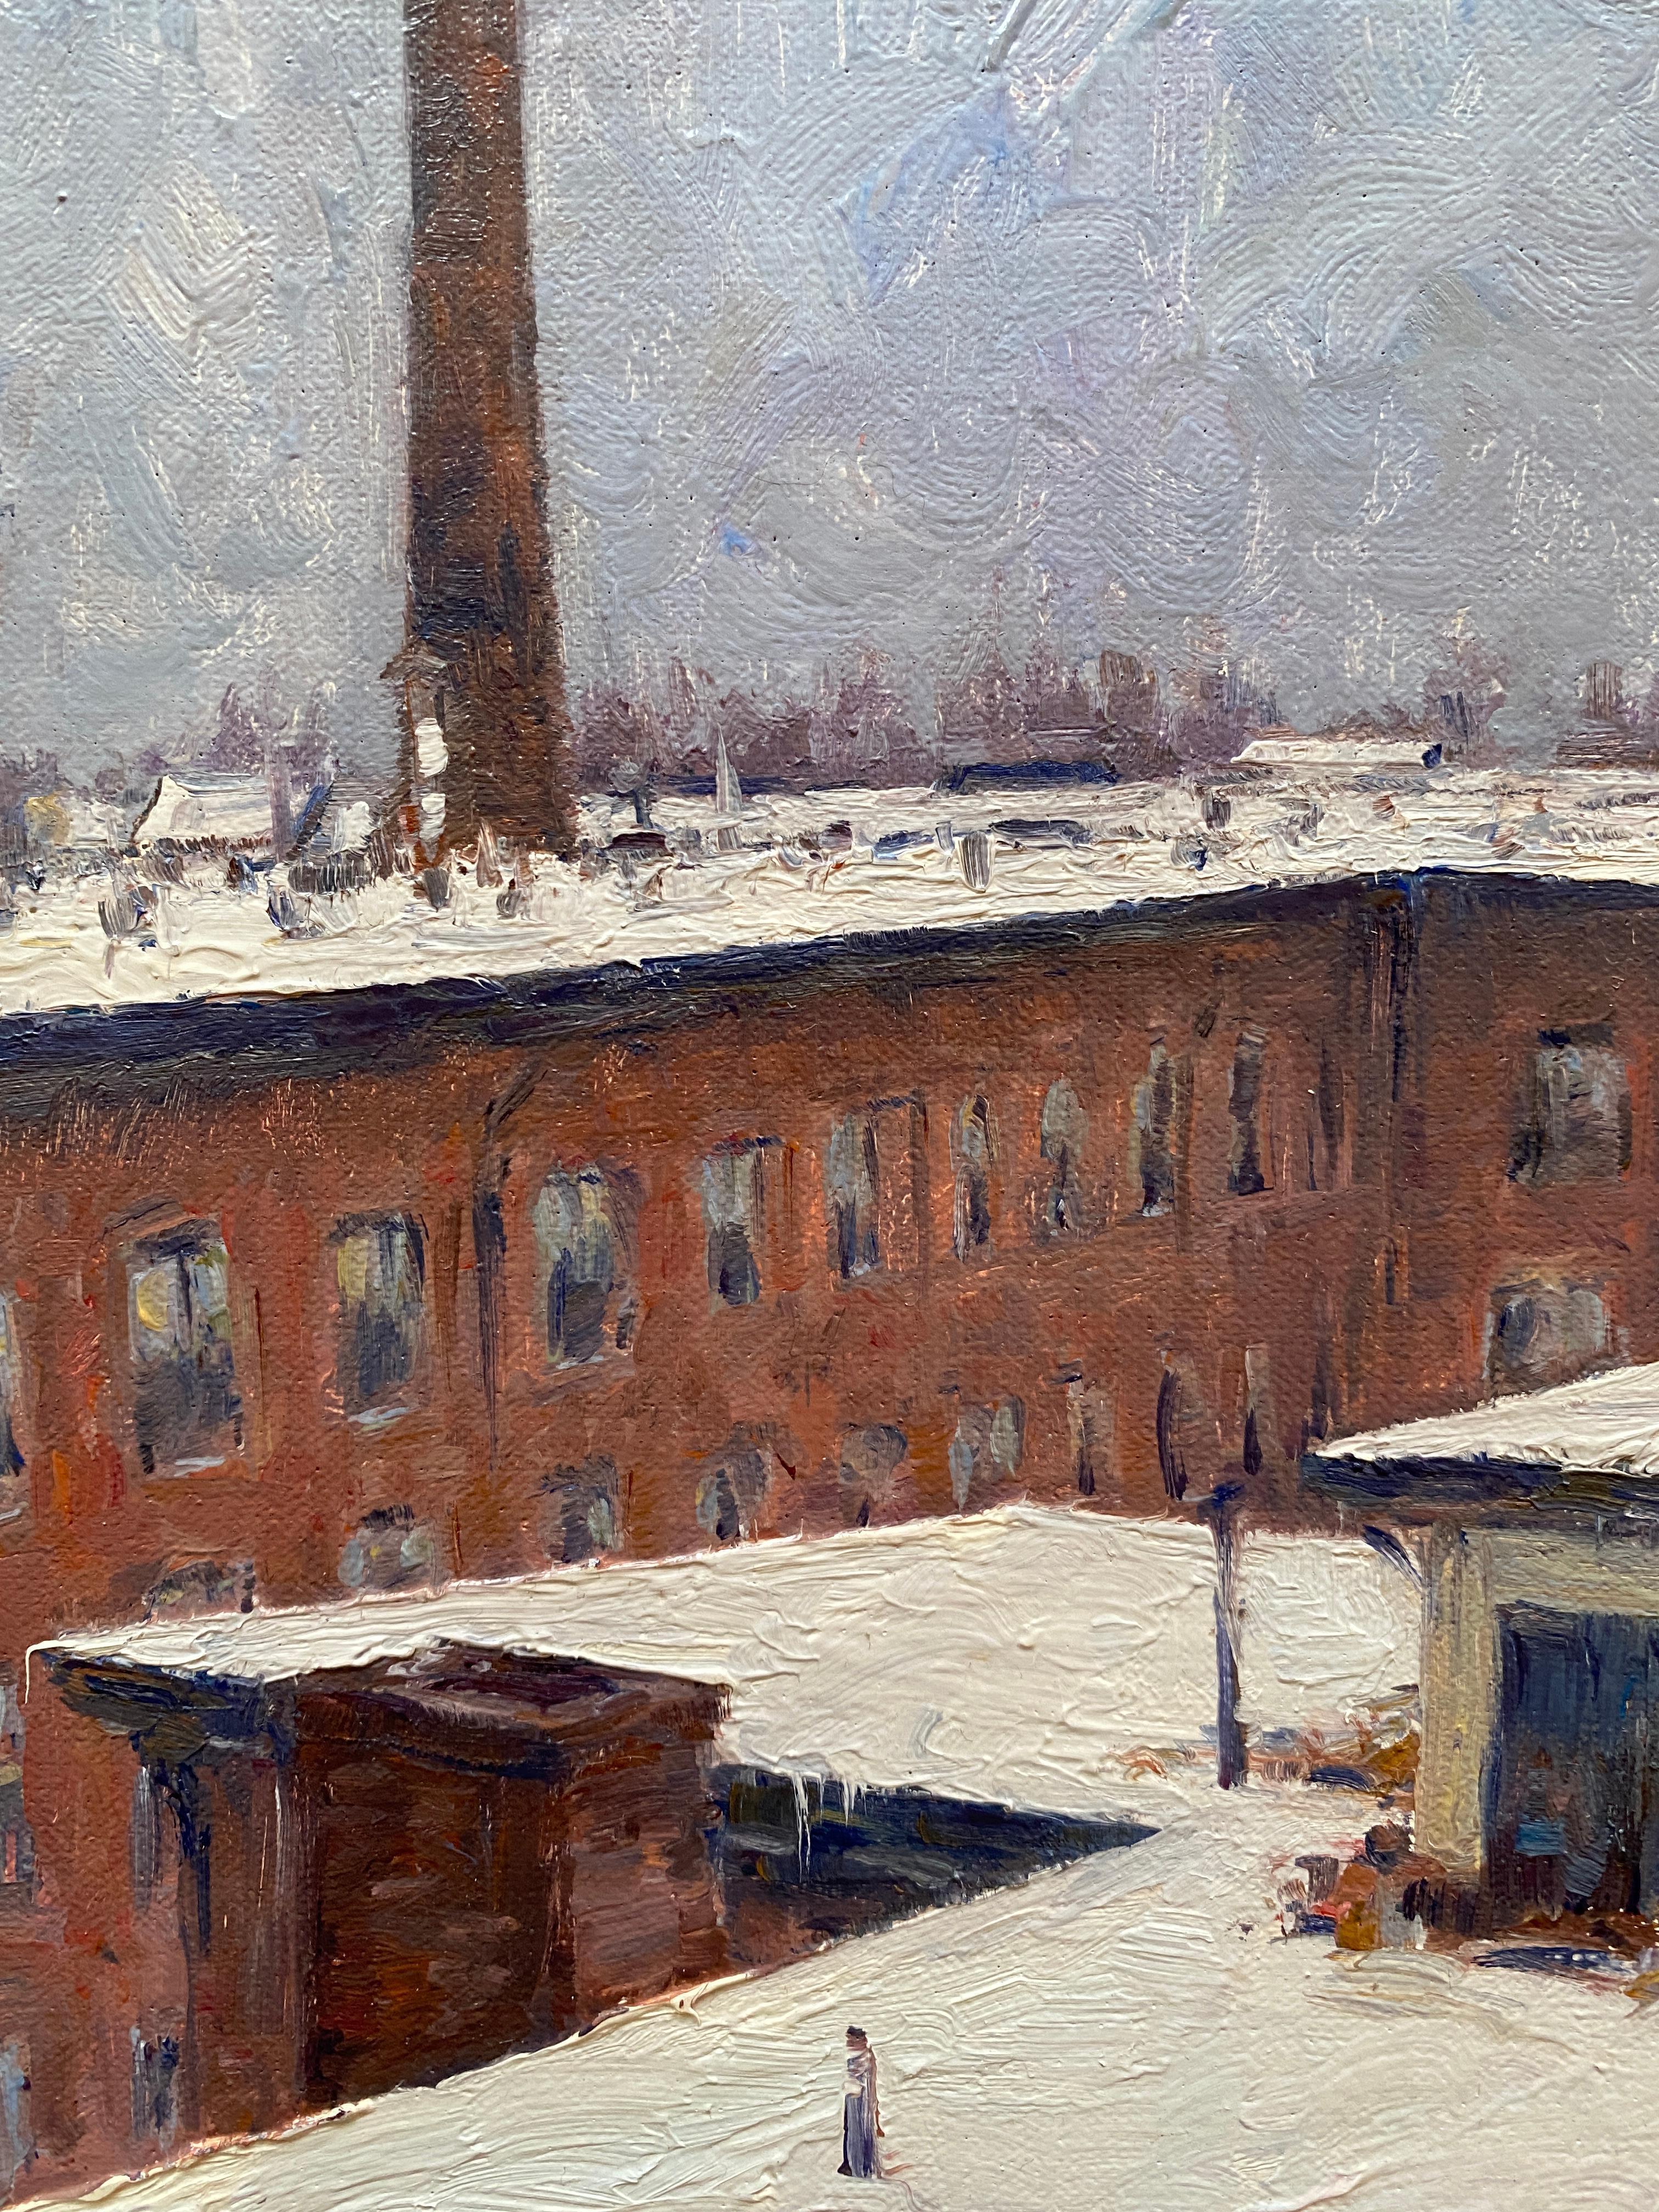 Oil painting of rooftops in the Snow, in Waltham, Massachusetts. Thick white paint lays a bed of snow atop roofs in an urban setting. A zig zag composition satisfies the viewer. 

Painting dimensions: 10 x 7 inches
Framed dimensions: 12 x 9